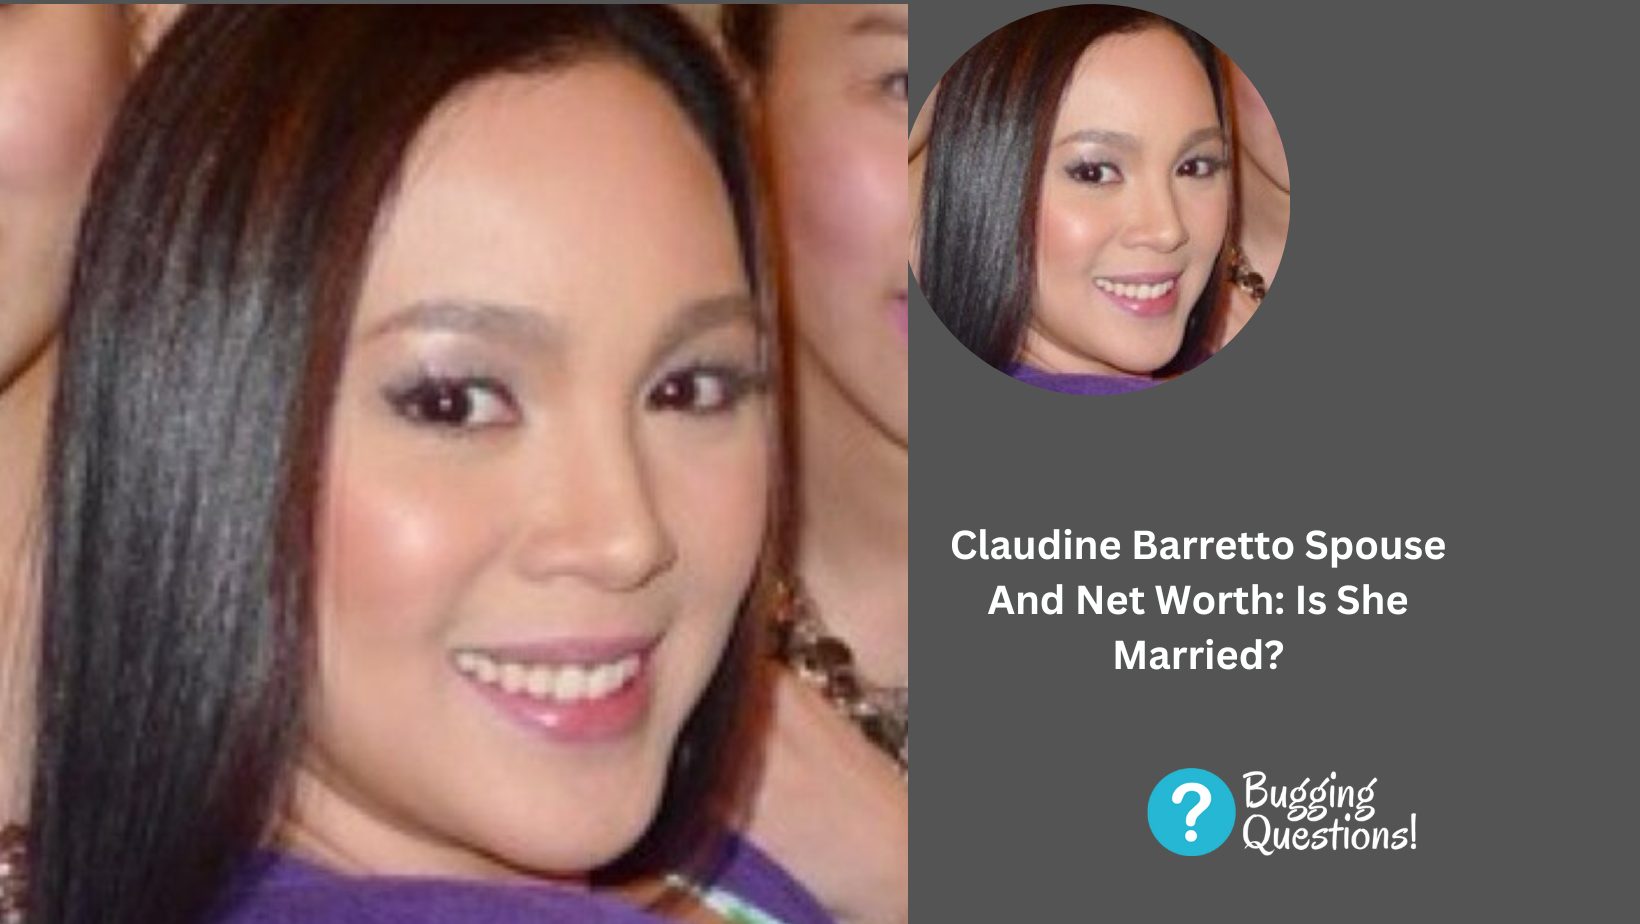 Claudine Barretto Spouse And Net Worth: Is She Married?